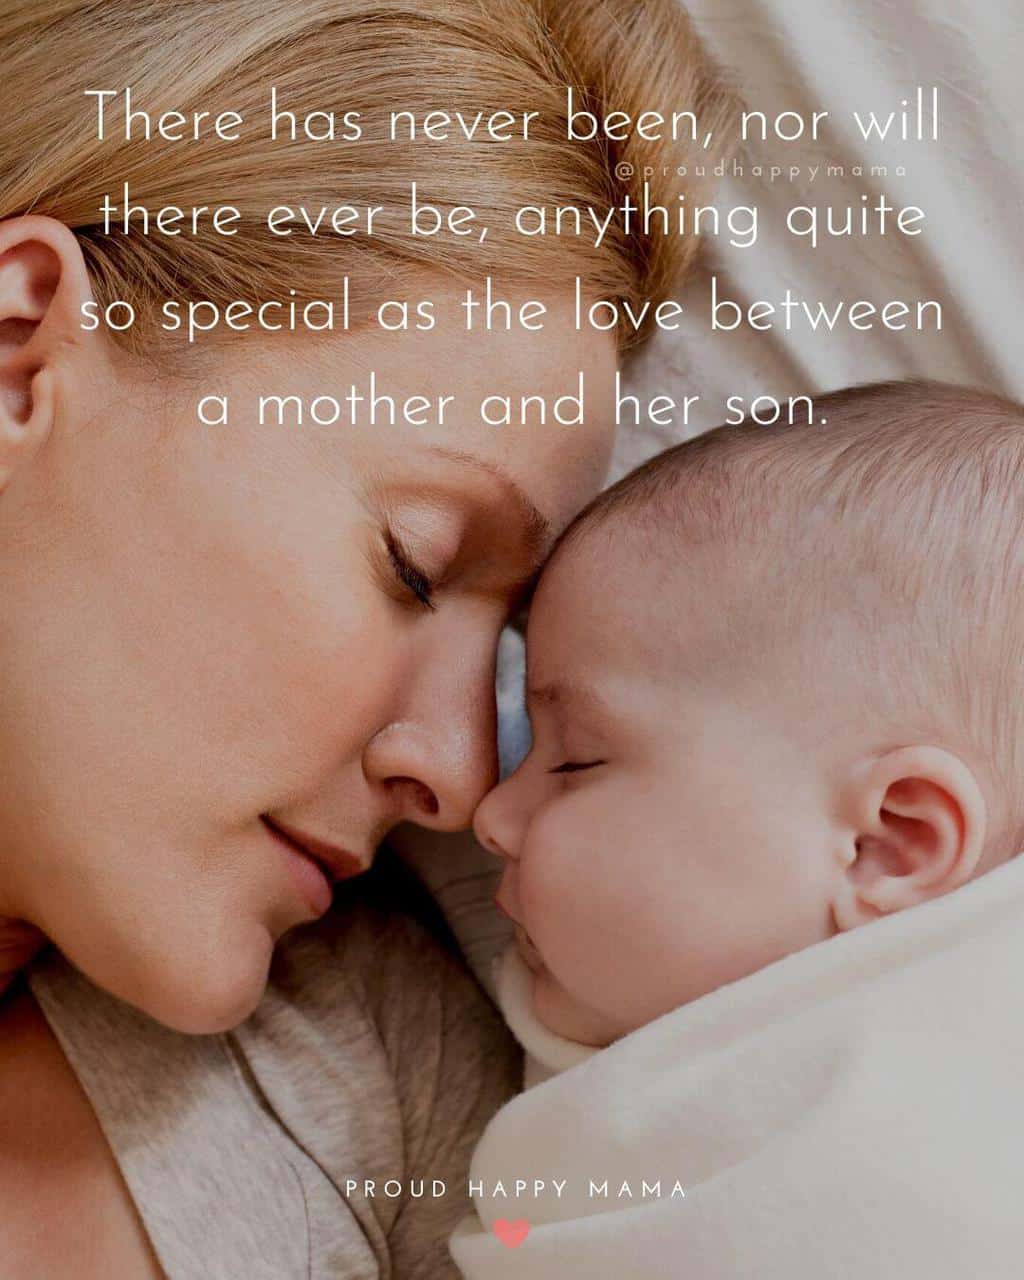 Mother And Son Quotes And Sayings | There has never been, nor will there ever be, anything quite so special as the love between a mother and her son.